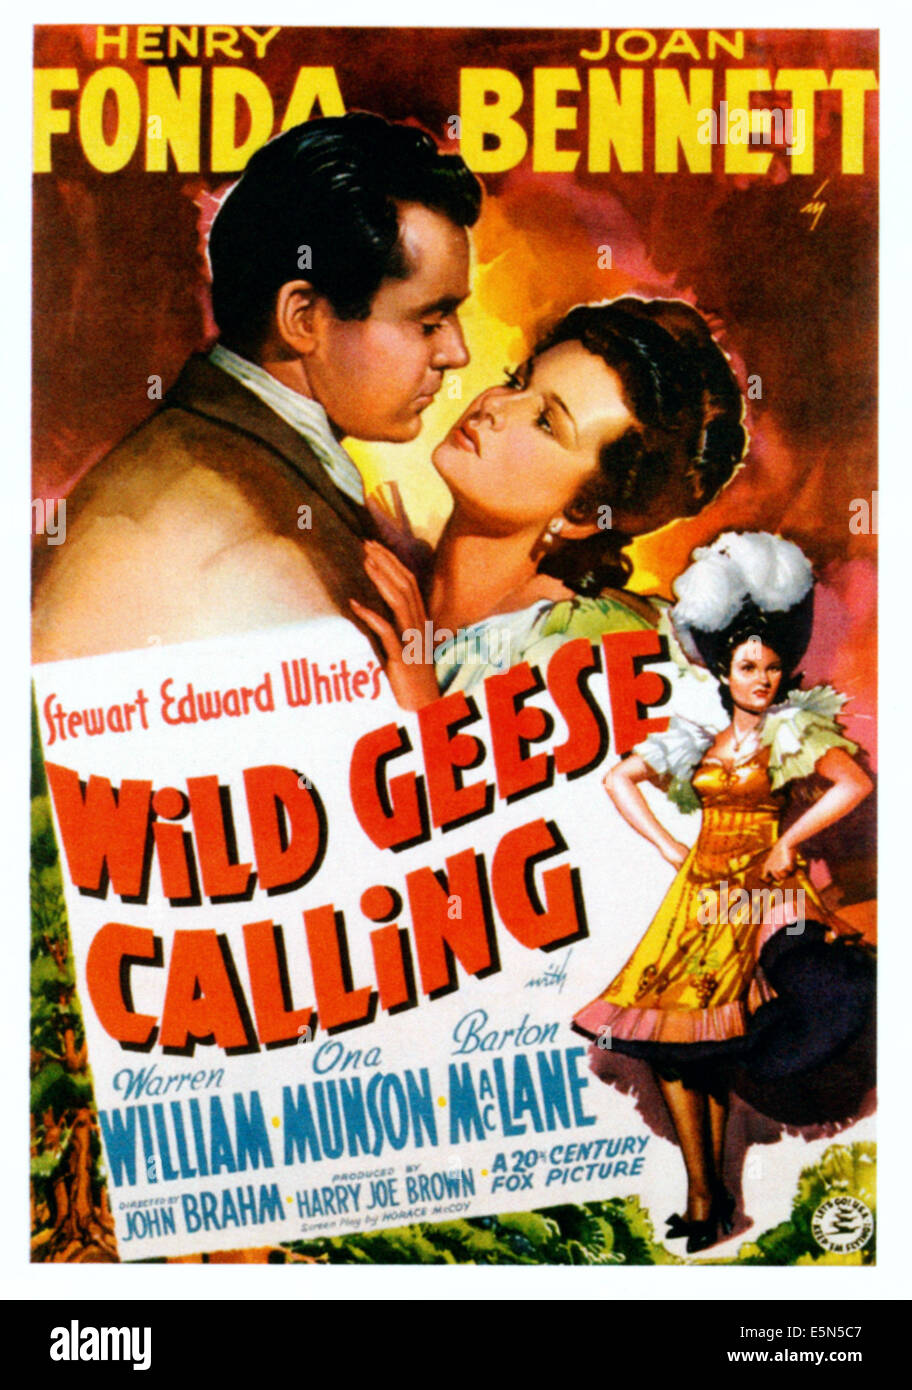 WILD GEESE CALLING, top from left: Henry Fonda, Joan Bennett on poster art, 1941, TM and Copyright ©20th Century Fox Film Corp. Stock Photo